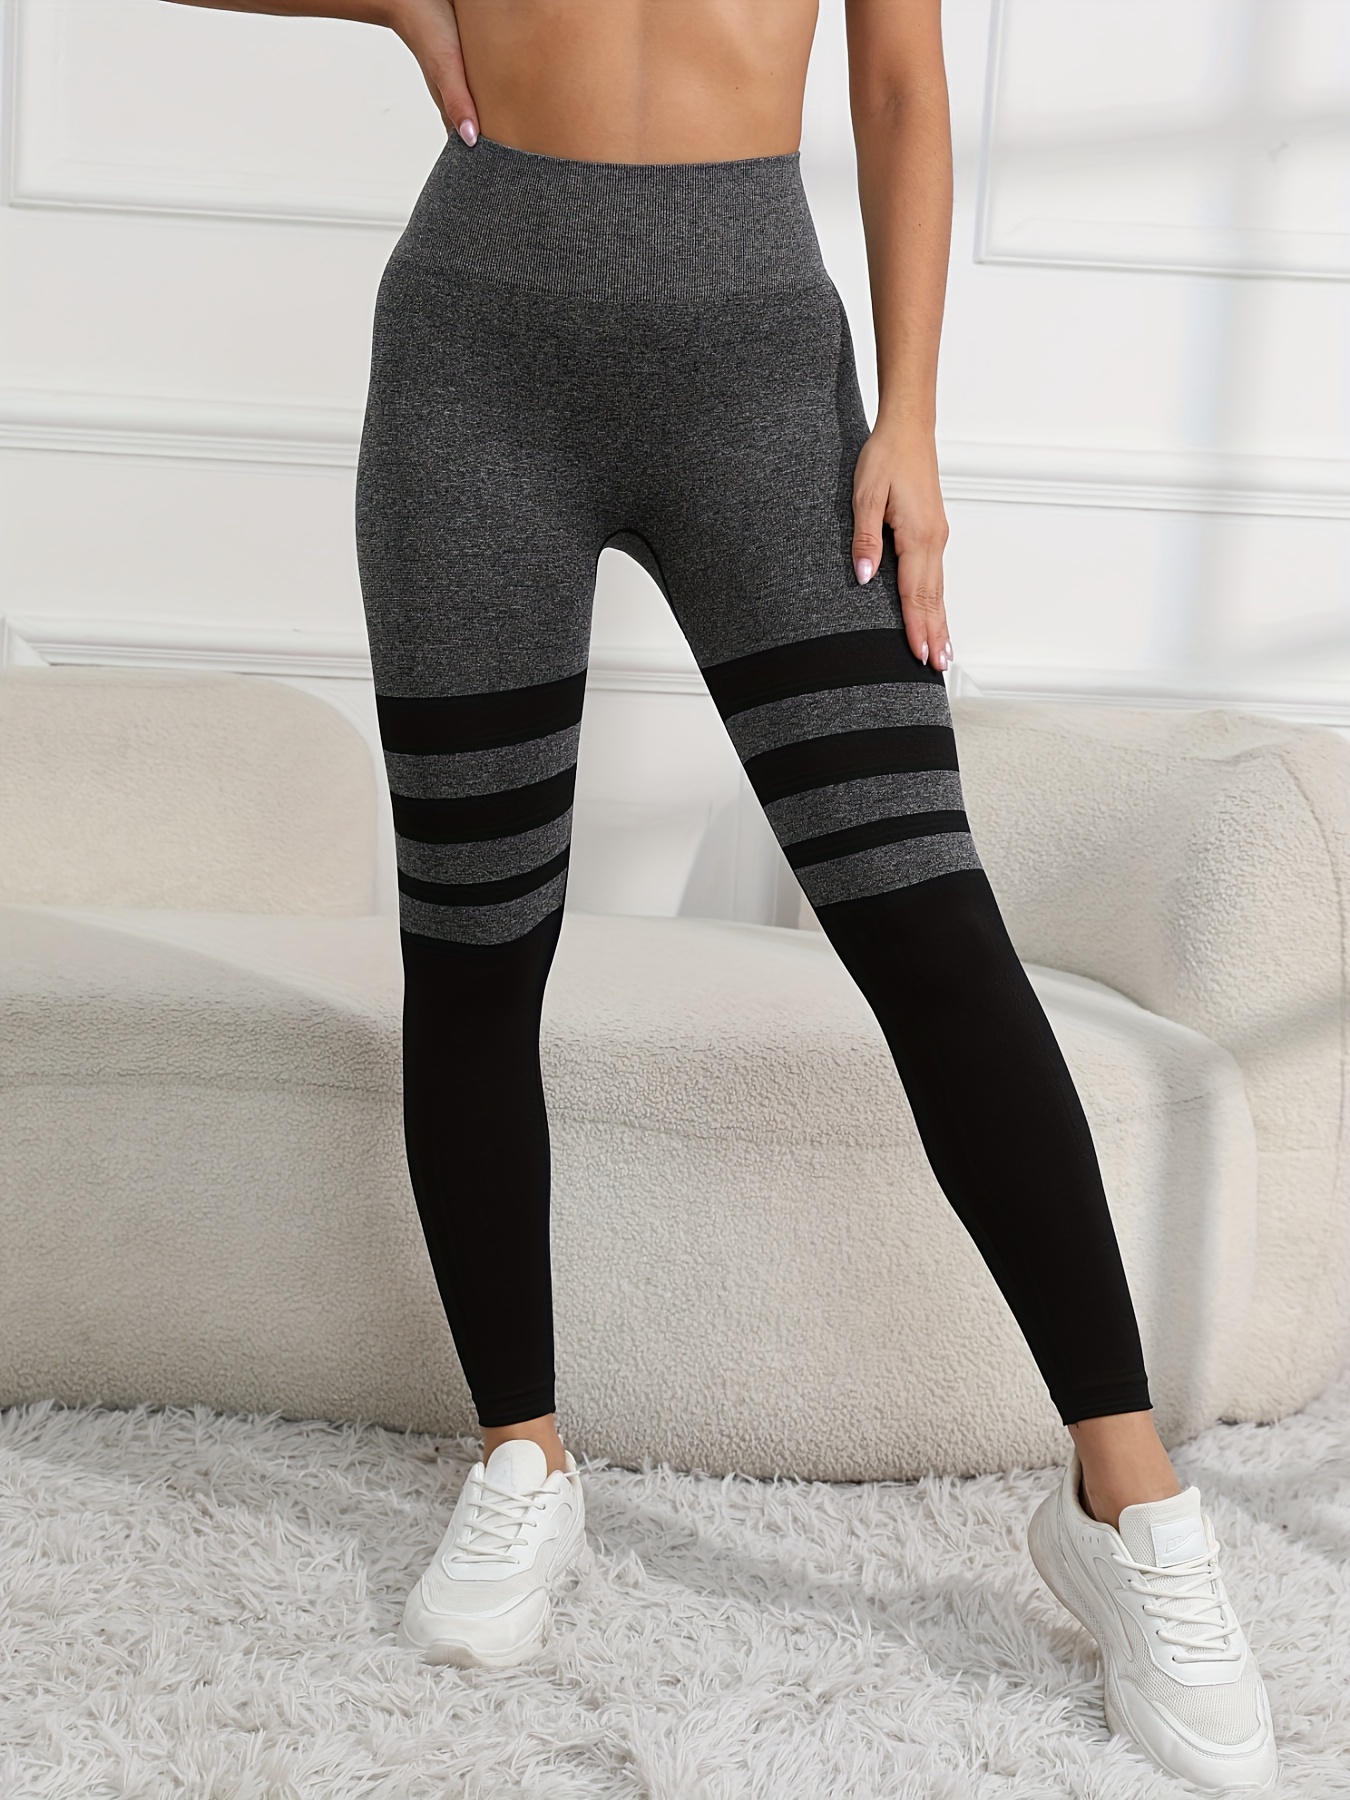 Women's Leggings Striped Running Pants Gym Outdoor Sports Casual Yoga Pants  Gray Blue